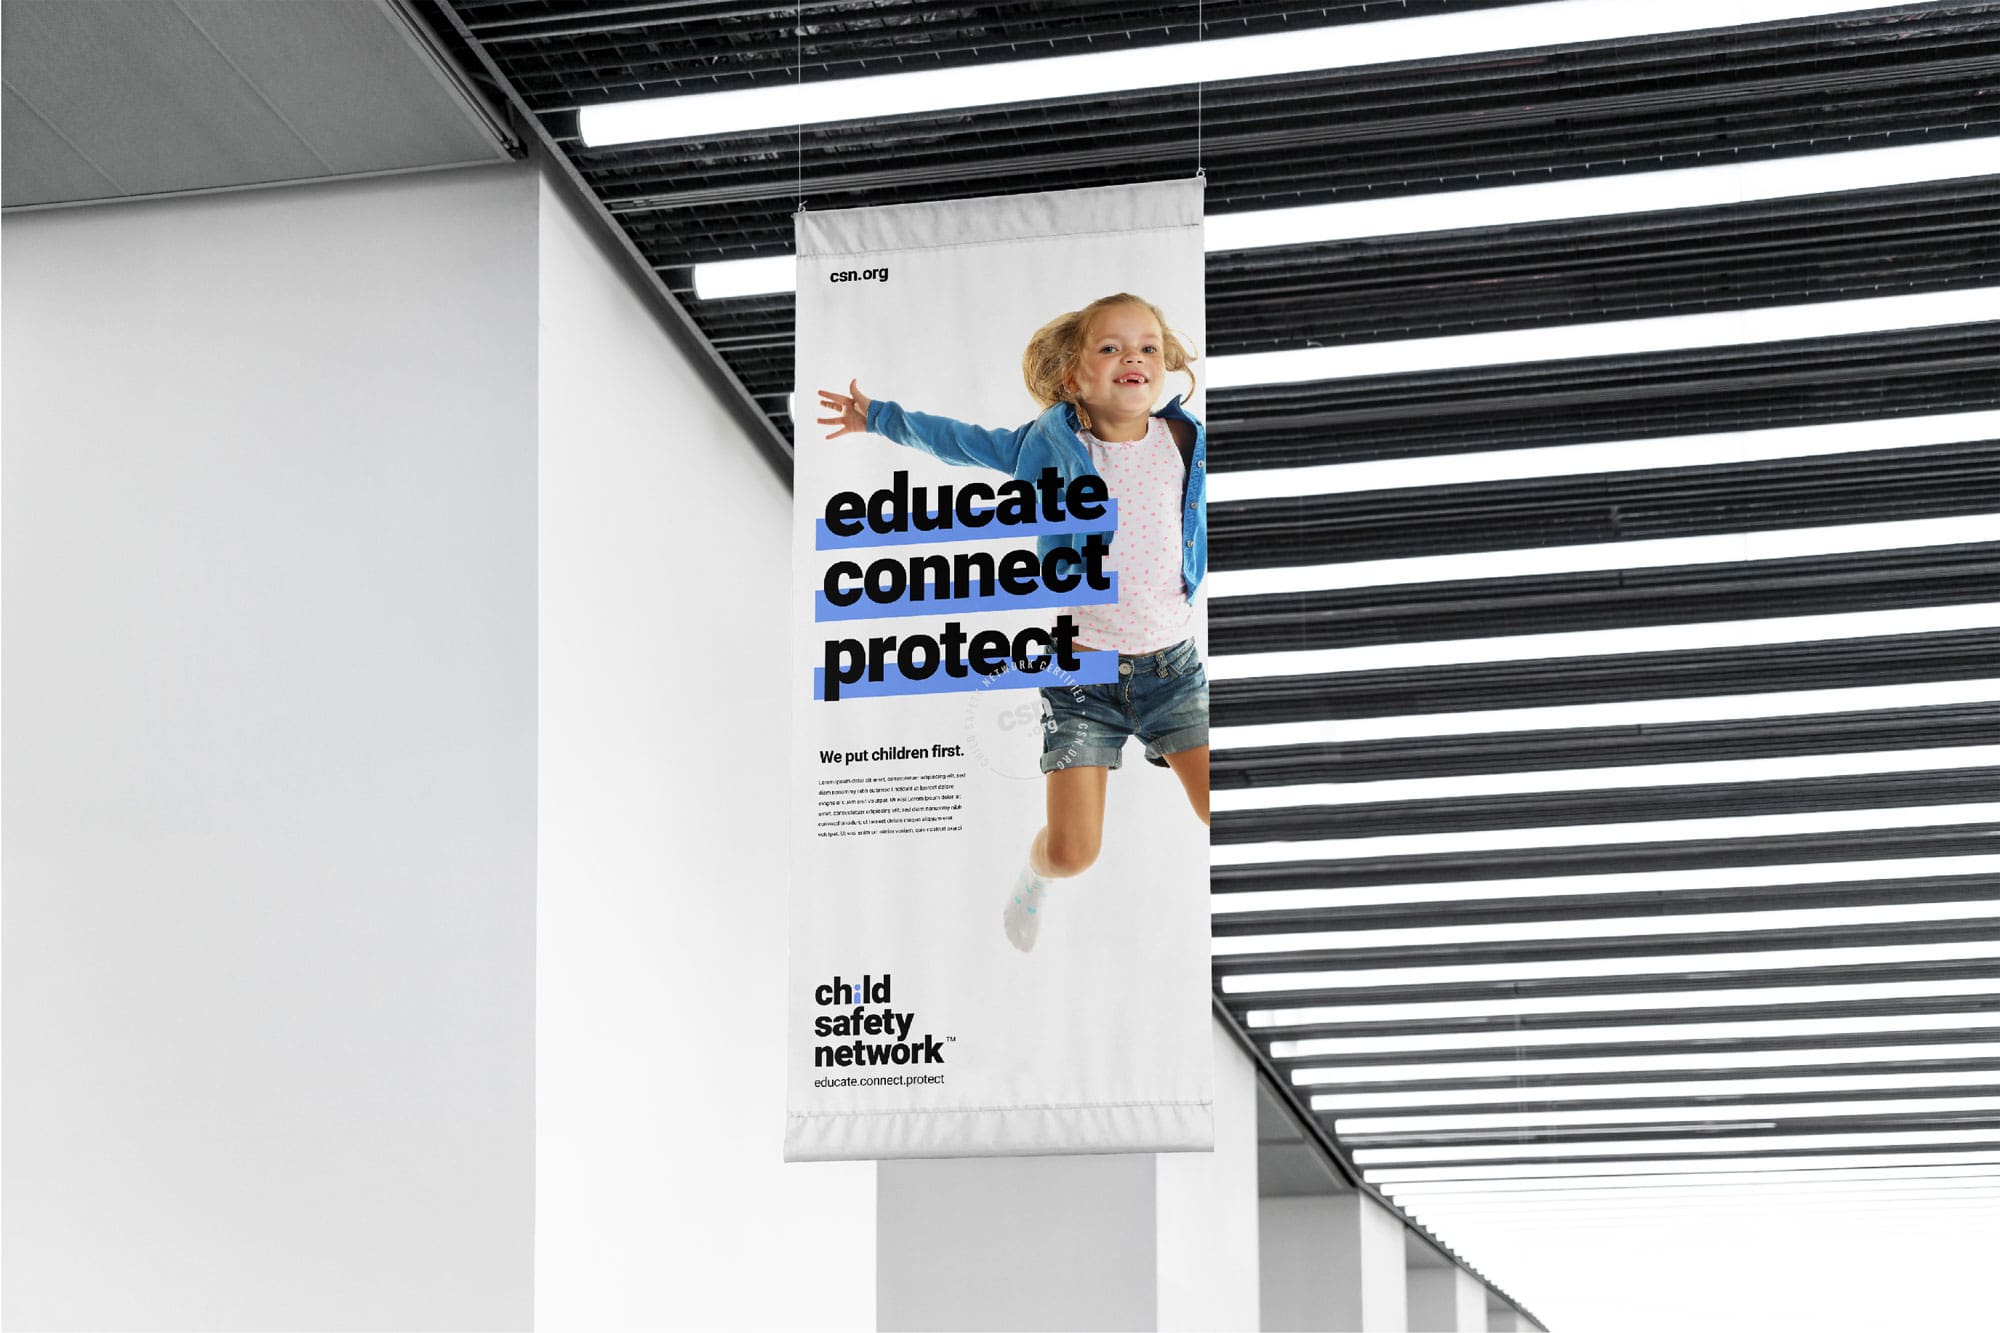 Child Safety Network on banner hanging from ceiling